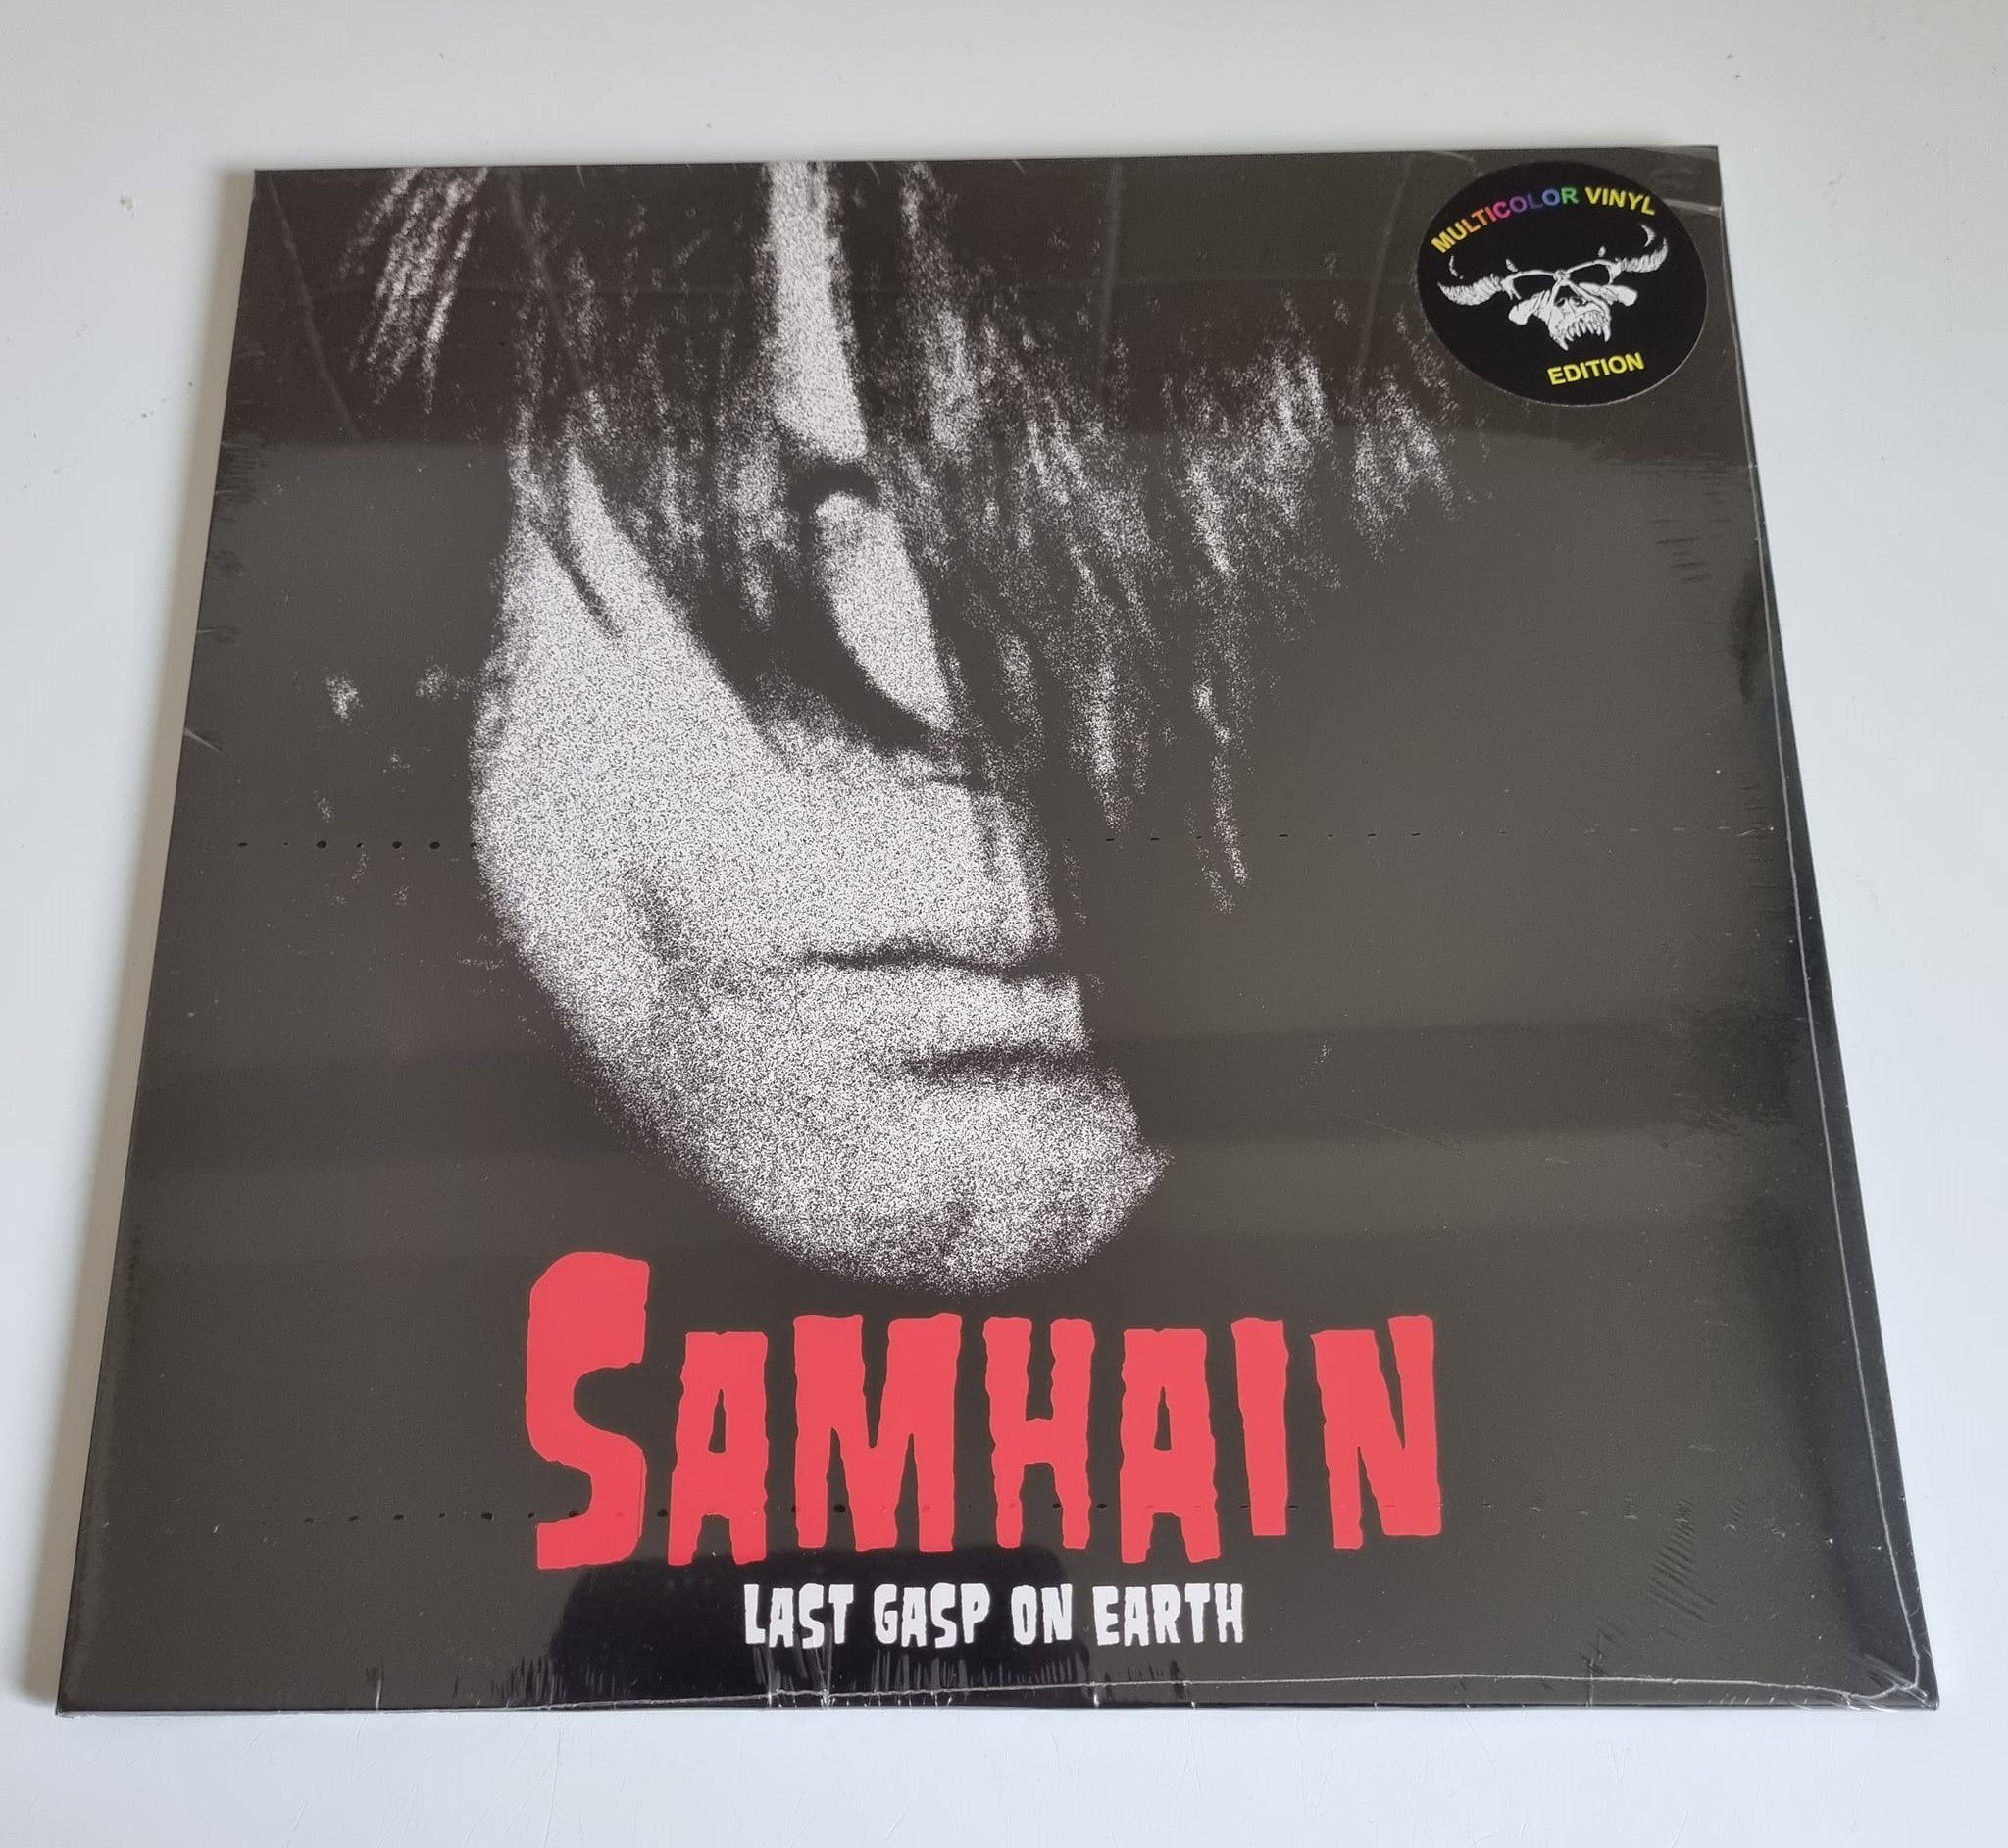 Buy this rare Samhain record by clicking here